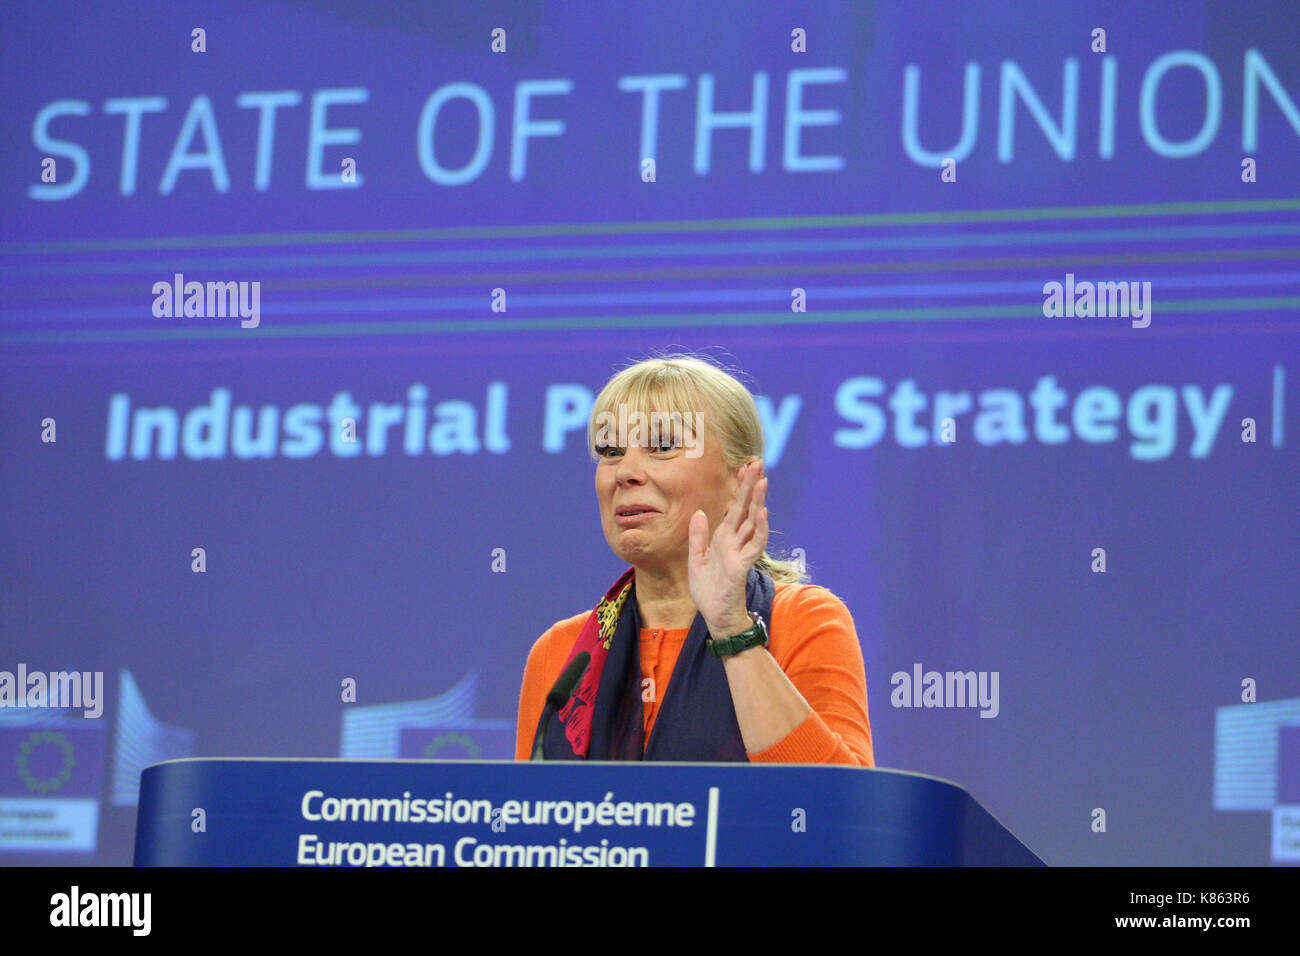 Brussels, Belgium. 18th Sept, 2017. State of the Union 2017 Press conference by Vice-President Jyrki KATAINEN and Commissioner Elżbieta Bieńkowska on the Industrial Policy Strategyon Industrial Policy strategy. Credit: Leo Cavallo/Alamy Live News Stock Photo